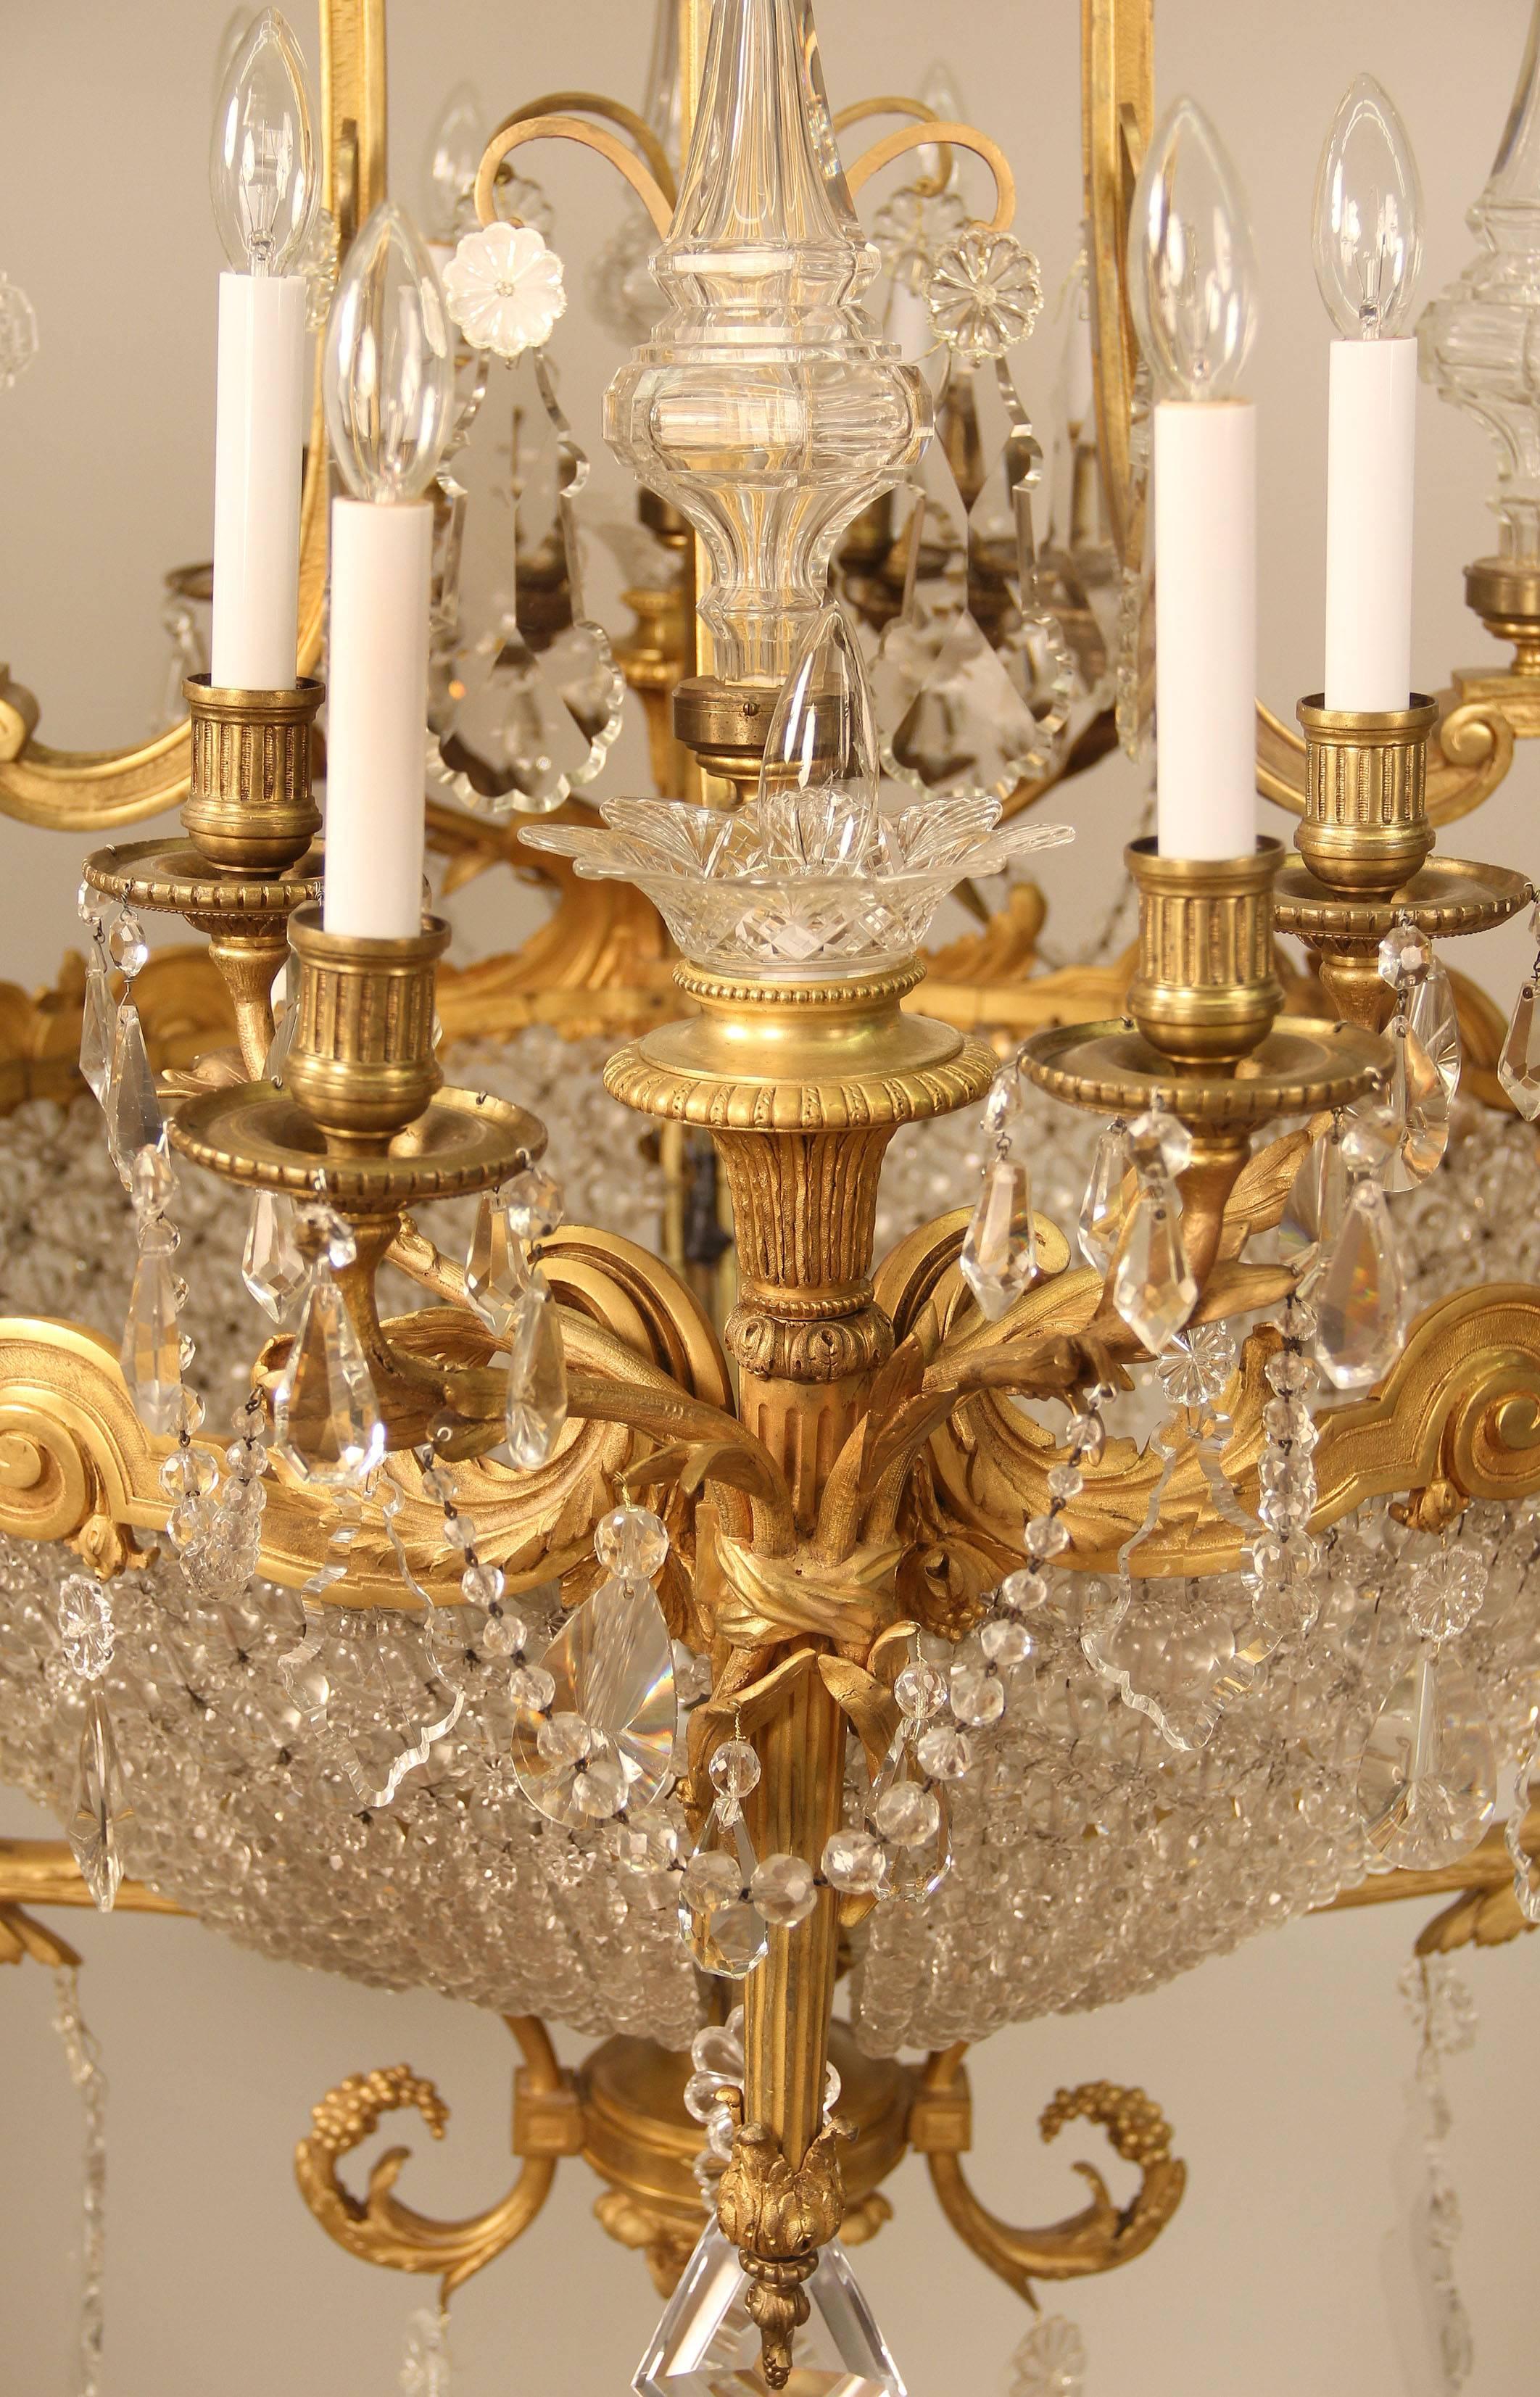 A unique and palatial late 19th century gilt bronze and cut crystal twenty-four-light basket chandelier

By Mottheau and Son Paris

Wonderful quality bronze casted cage in oval form, two arms shaped as torches with five lights and two as